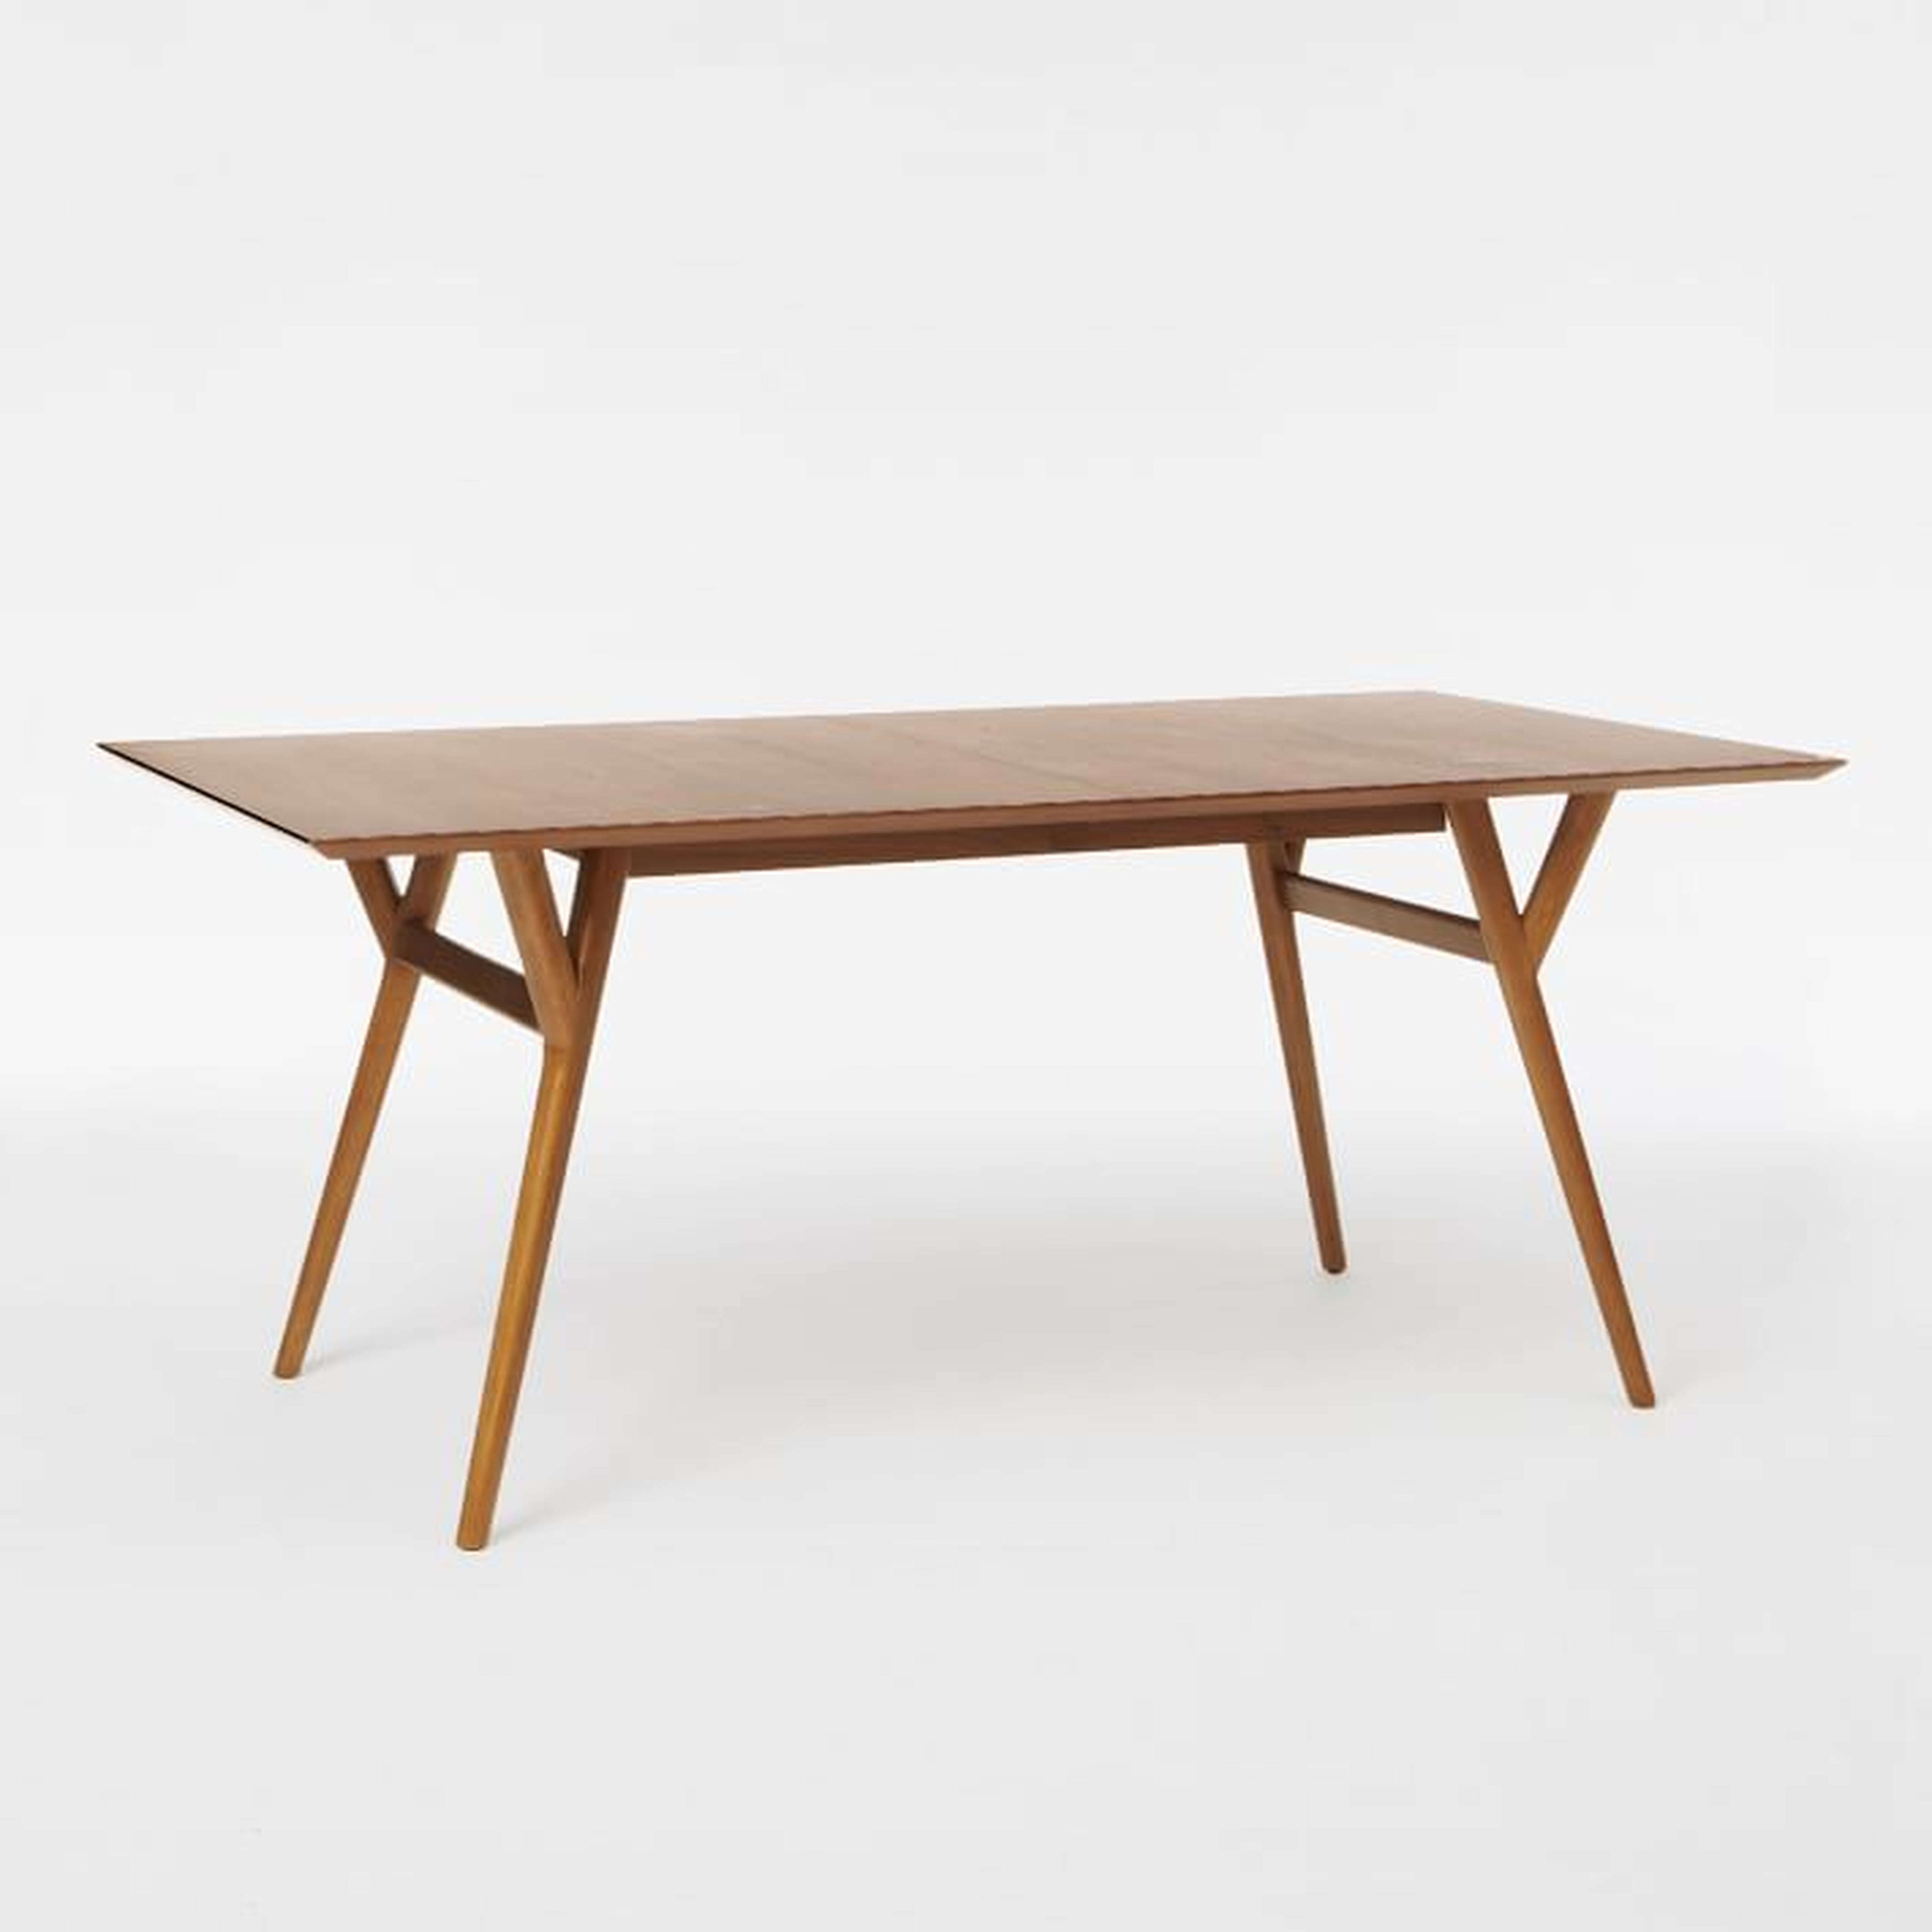 Mid-Century Expandable Dining Table, 60-80", Walnut - West Elm